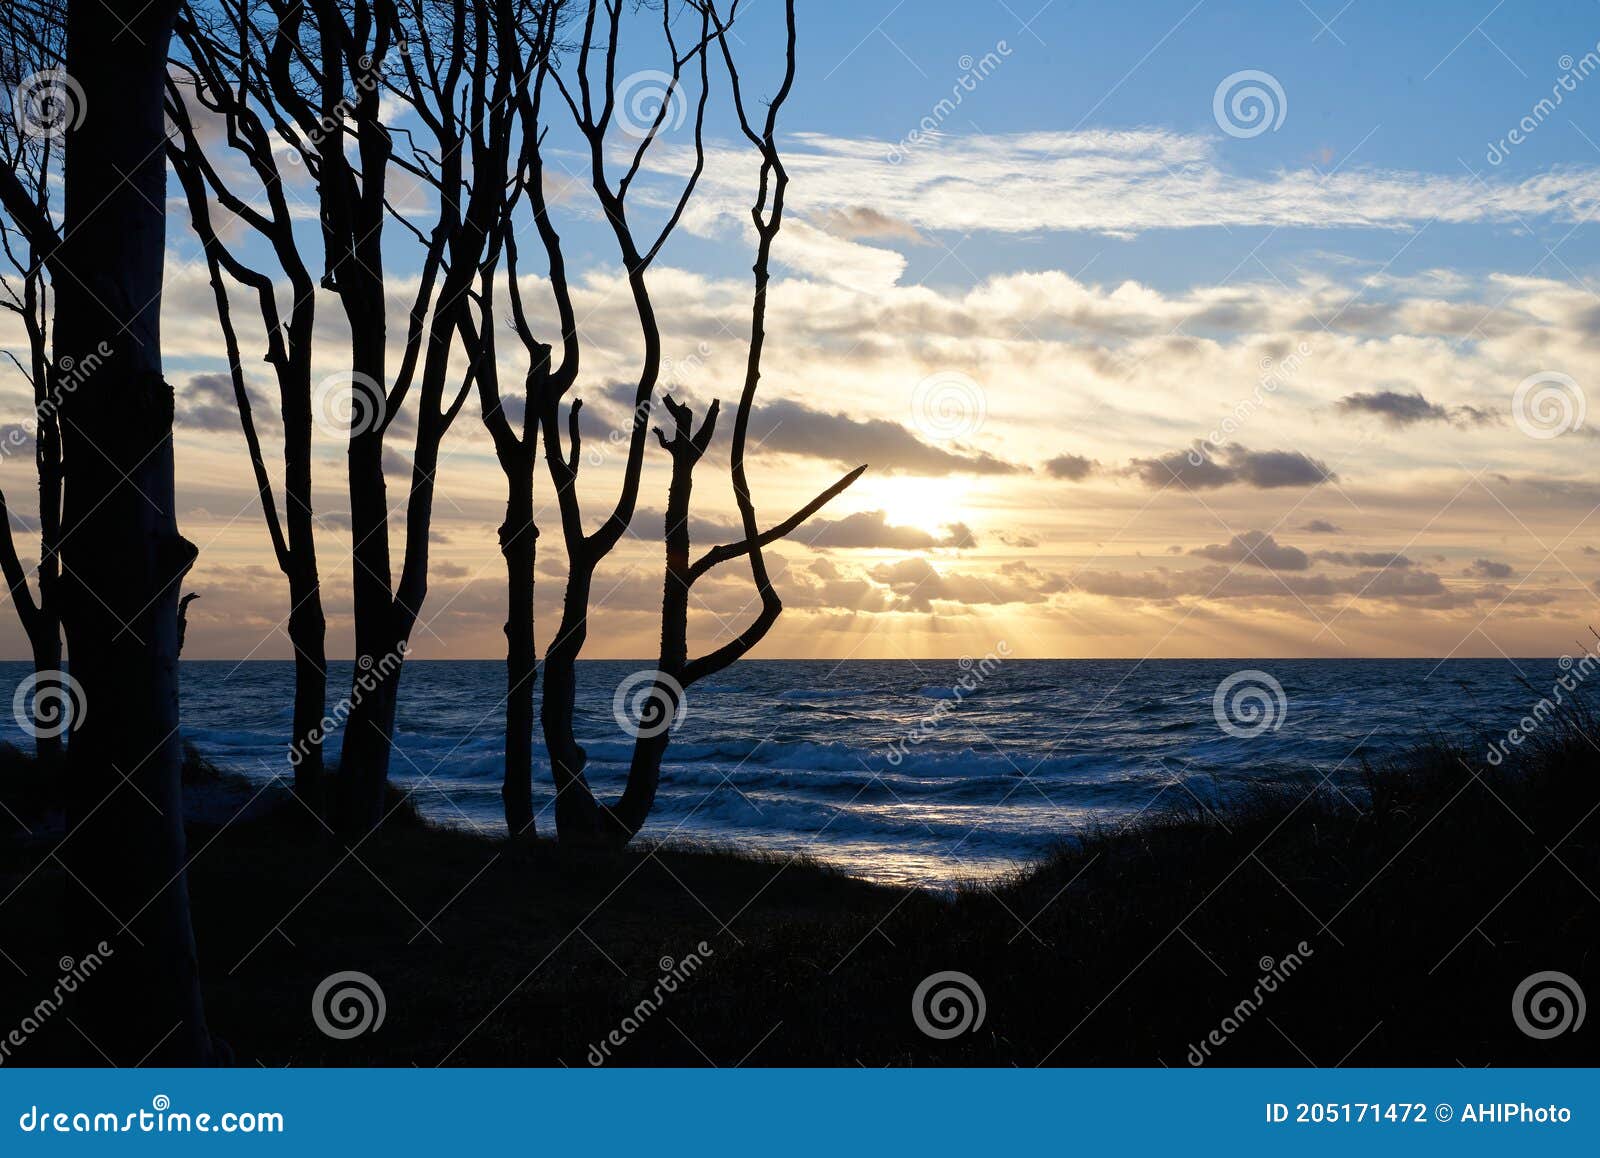 picturesque  colorful sunset over the baltic sea  with glowing clouds  small waves and tree sillouettes in the foreground.